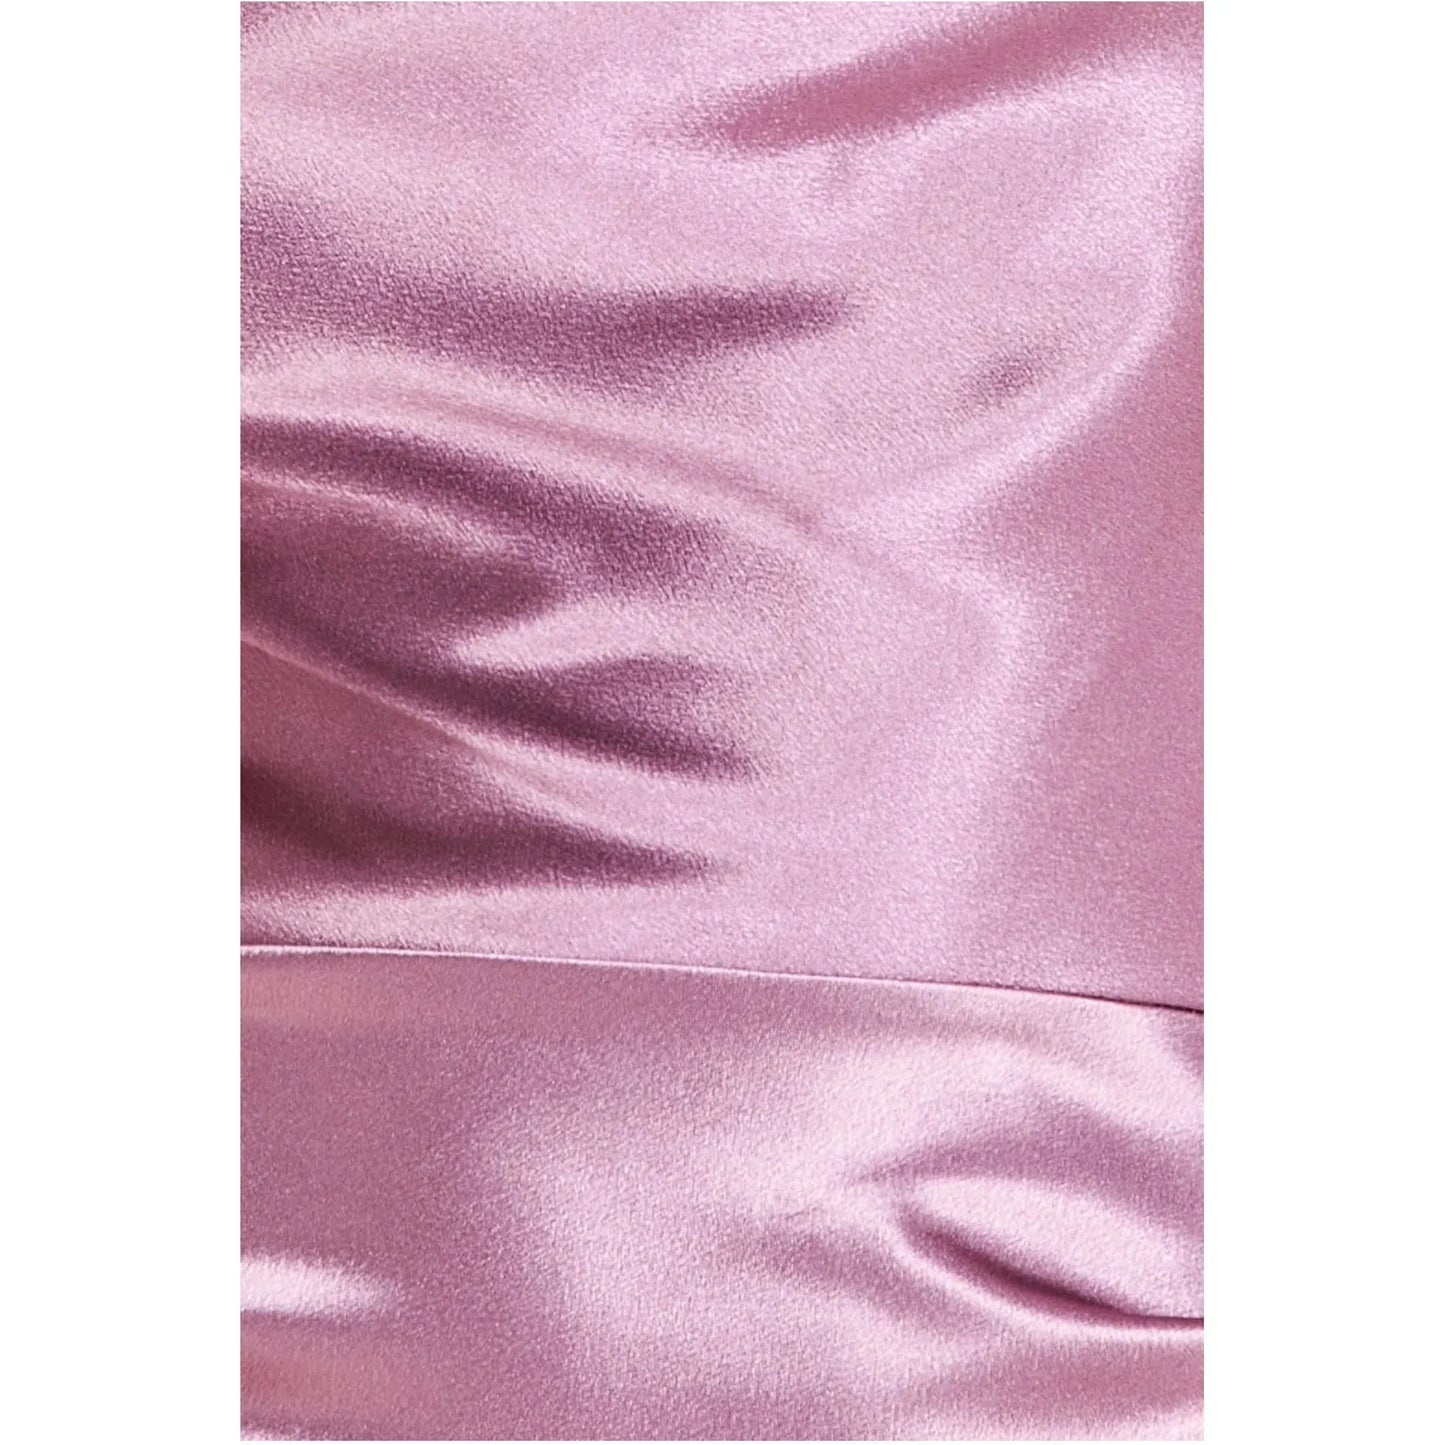 Cowl Neck Satin Maxi Dress With Strappy Back - Pink